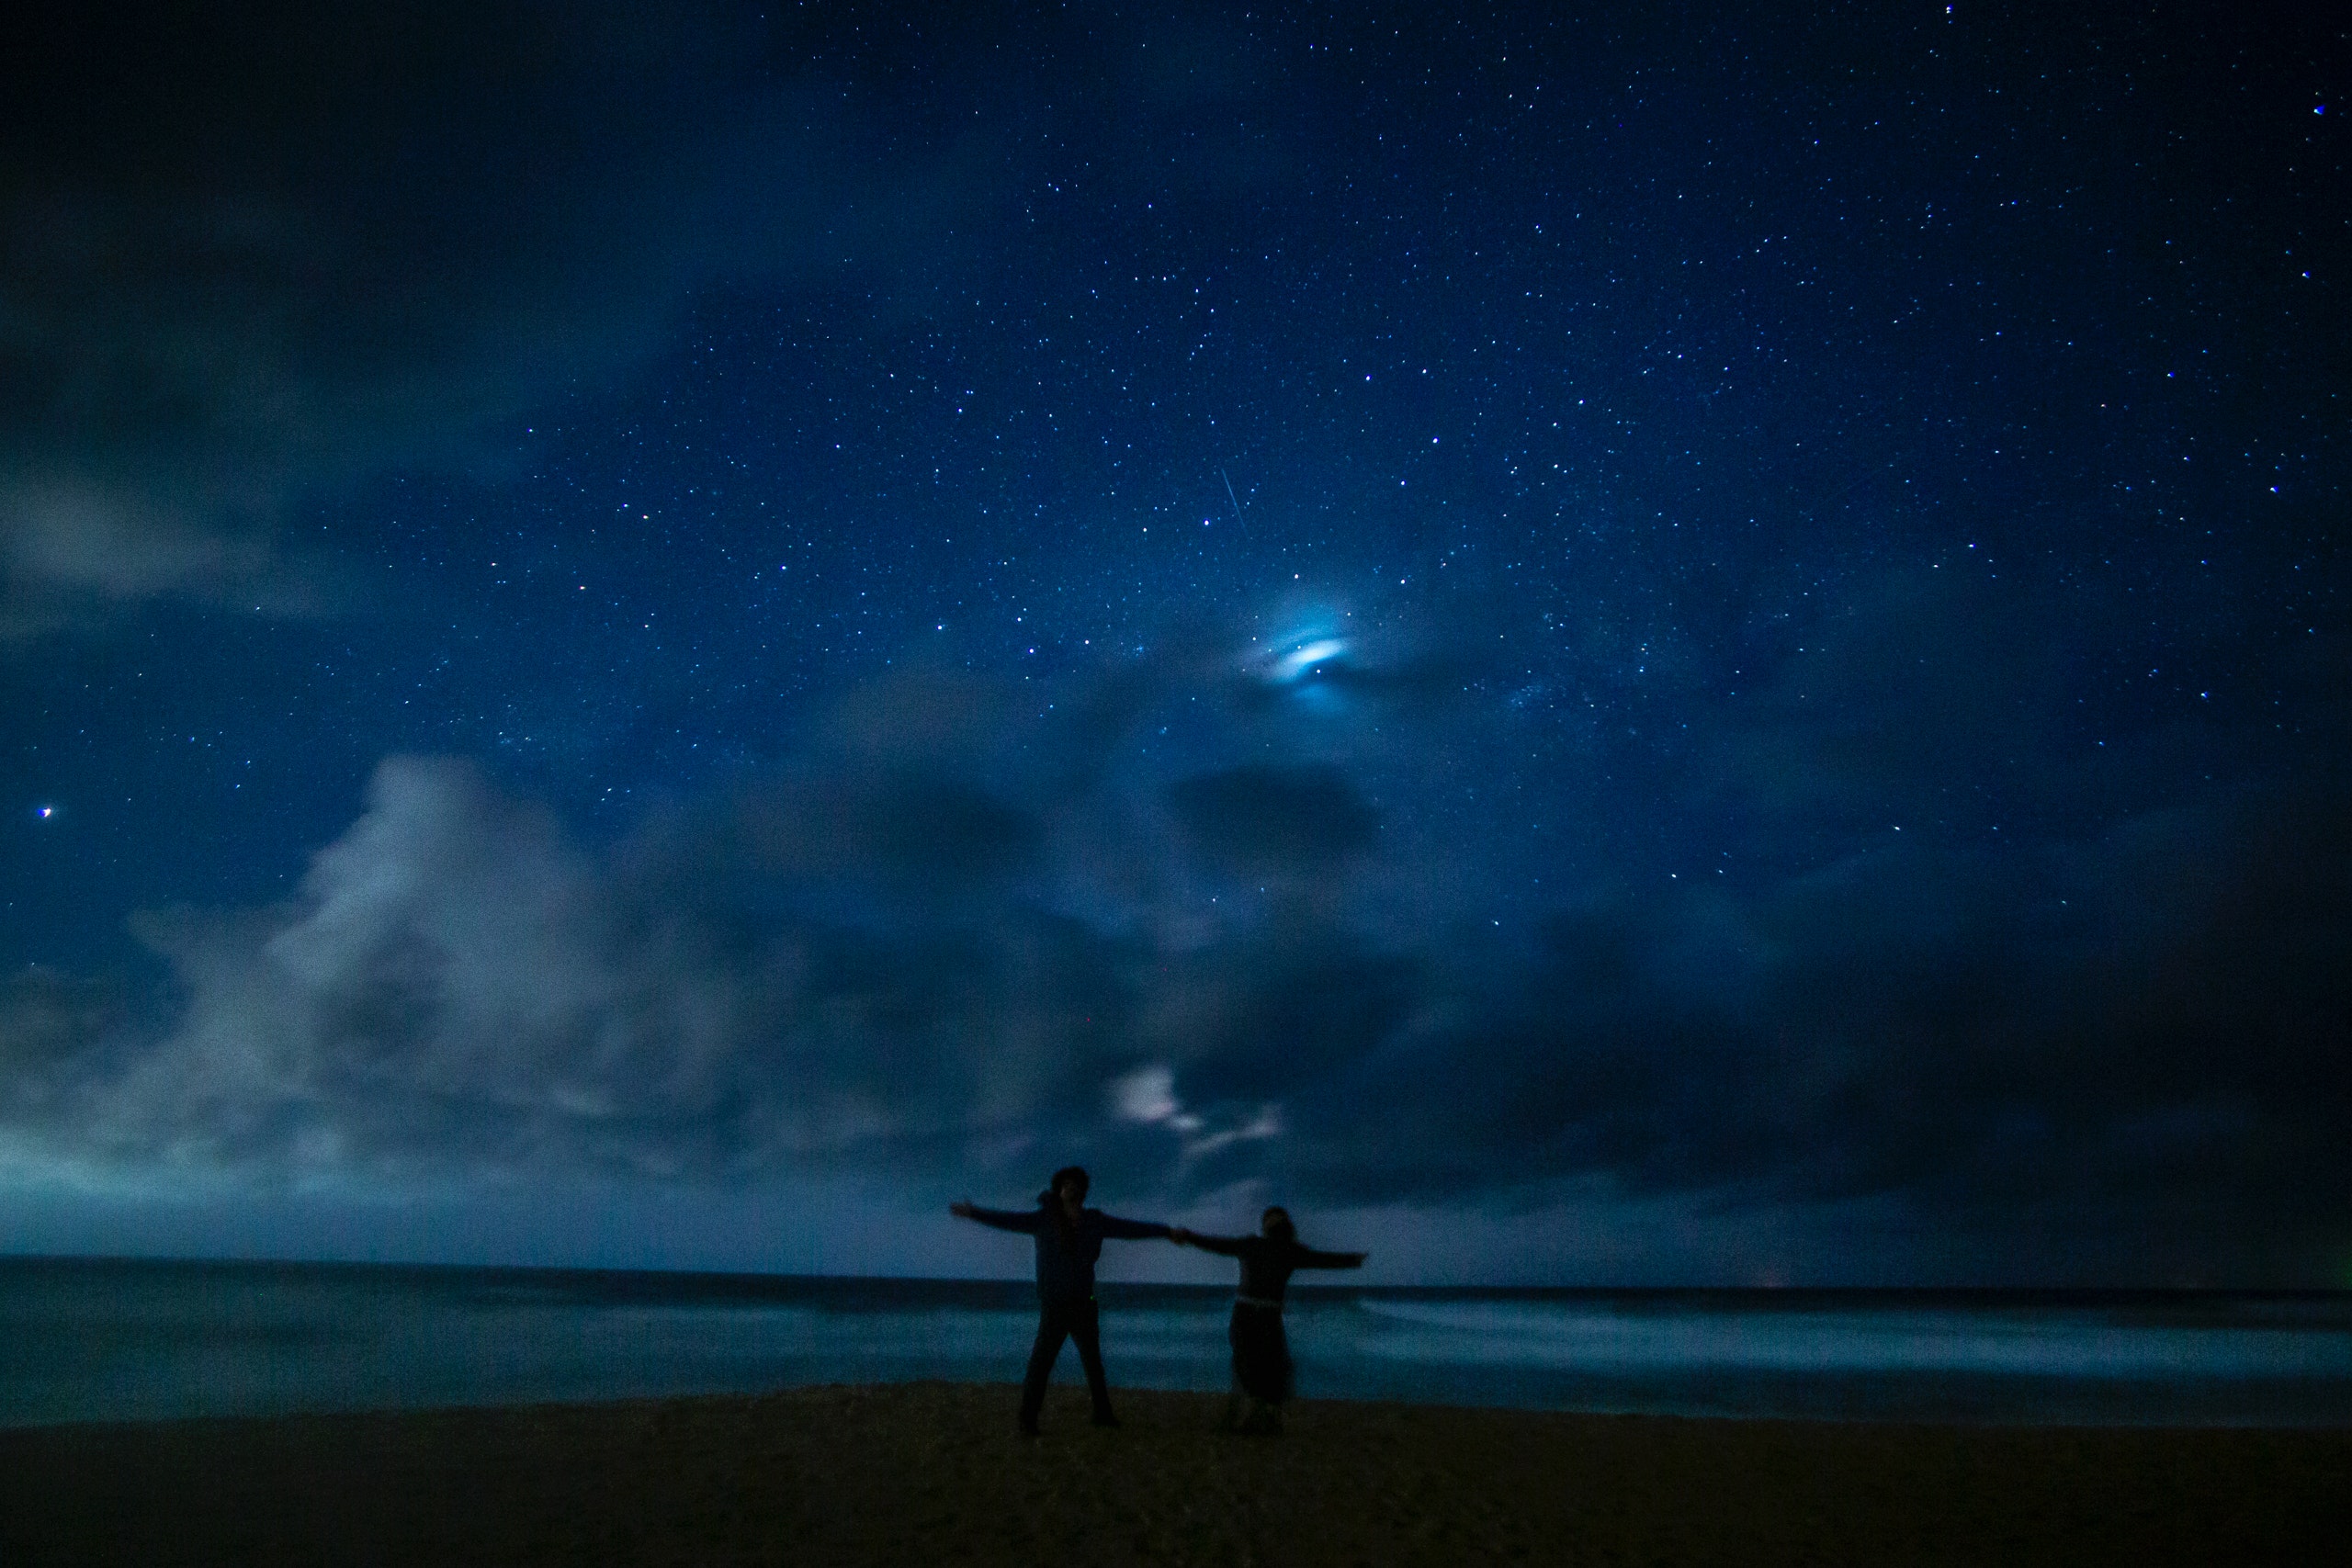 A couple on the beach under a starry sky. | Source: Pexels